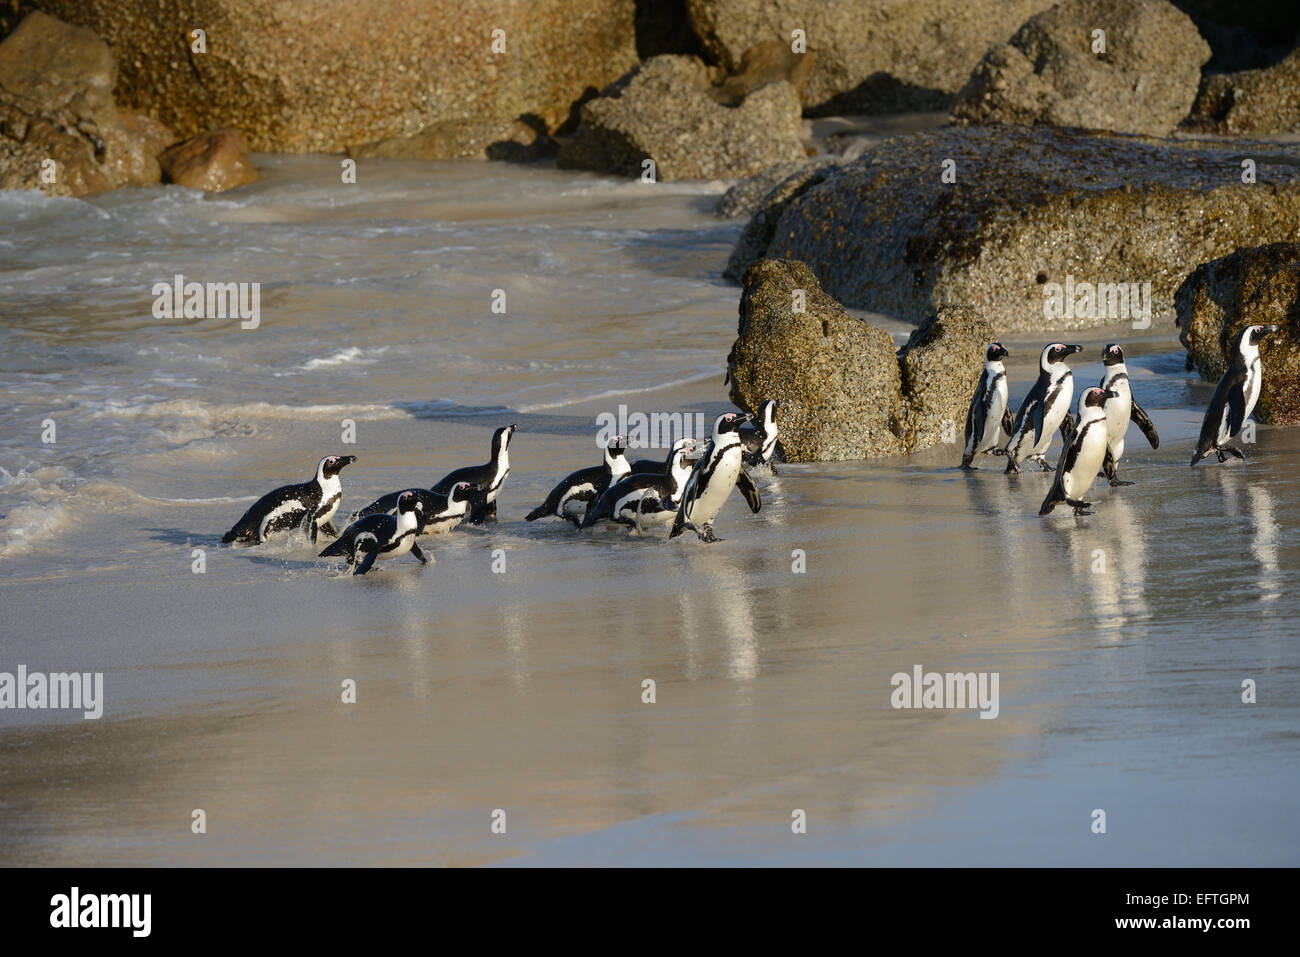 African Penguins (Spheniscus demersus) at a beach near Cape Town in South Africa. Stock Photo